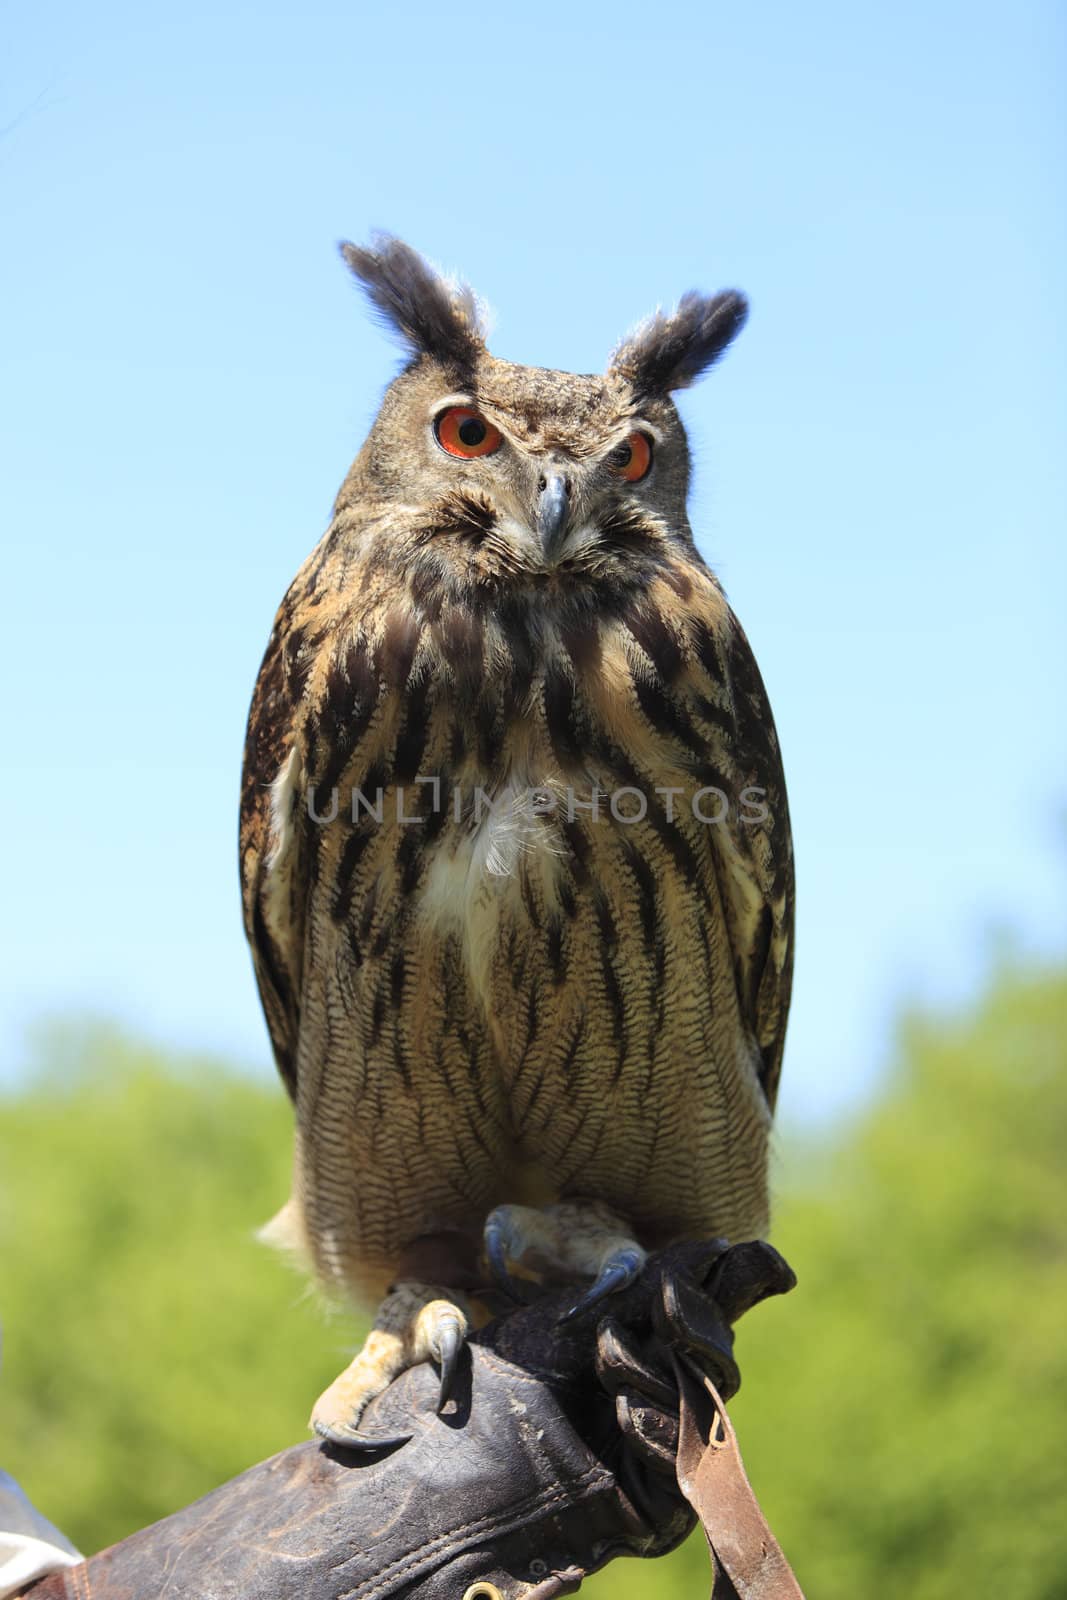 Image of an eagle owl standing on the tamer's hand.